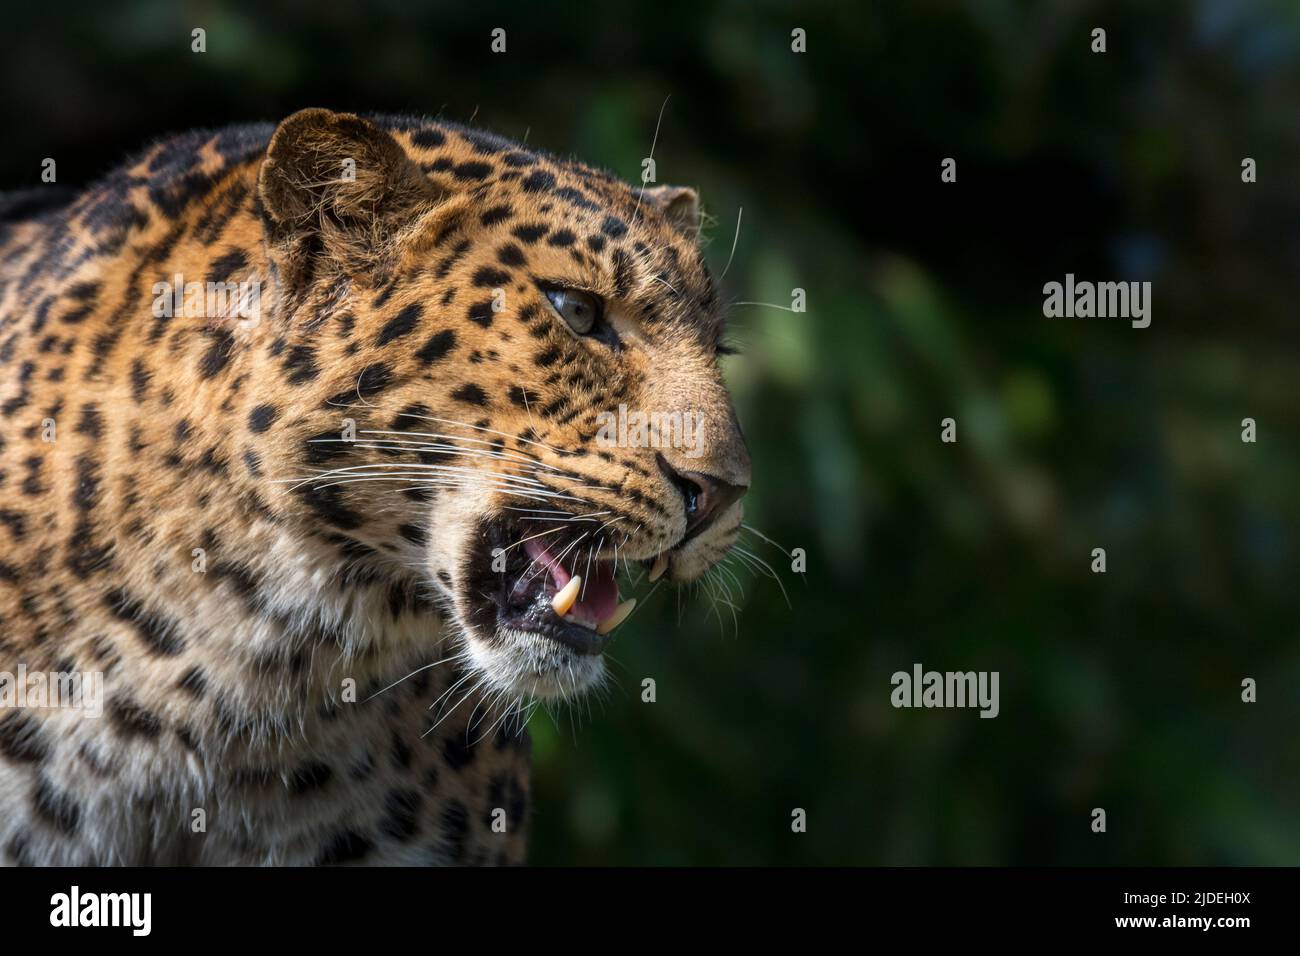 Amur leopard (Panthera pardus orientalis) close-up portrait showing canines / fangs, native to southeastern Russia and northern China Stock Photo